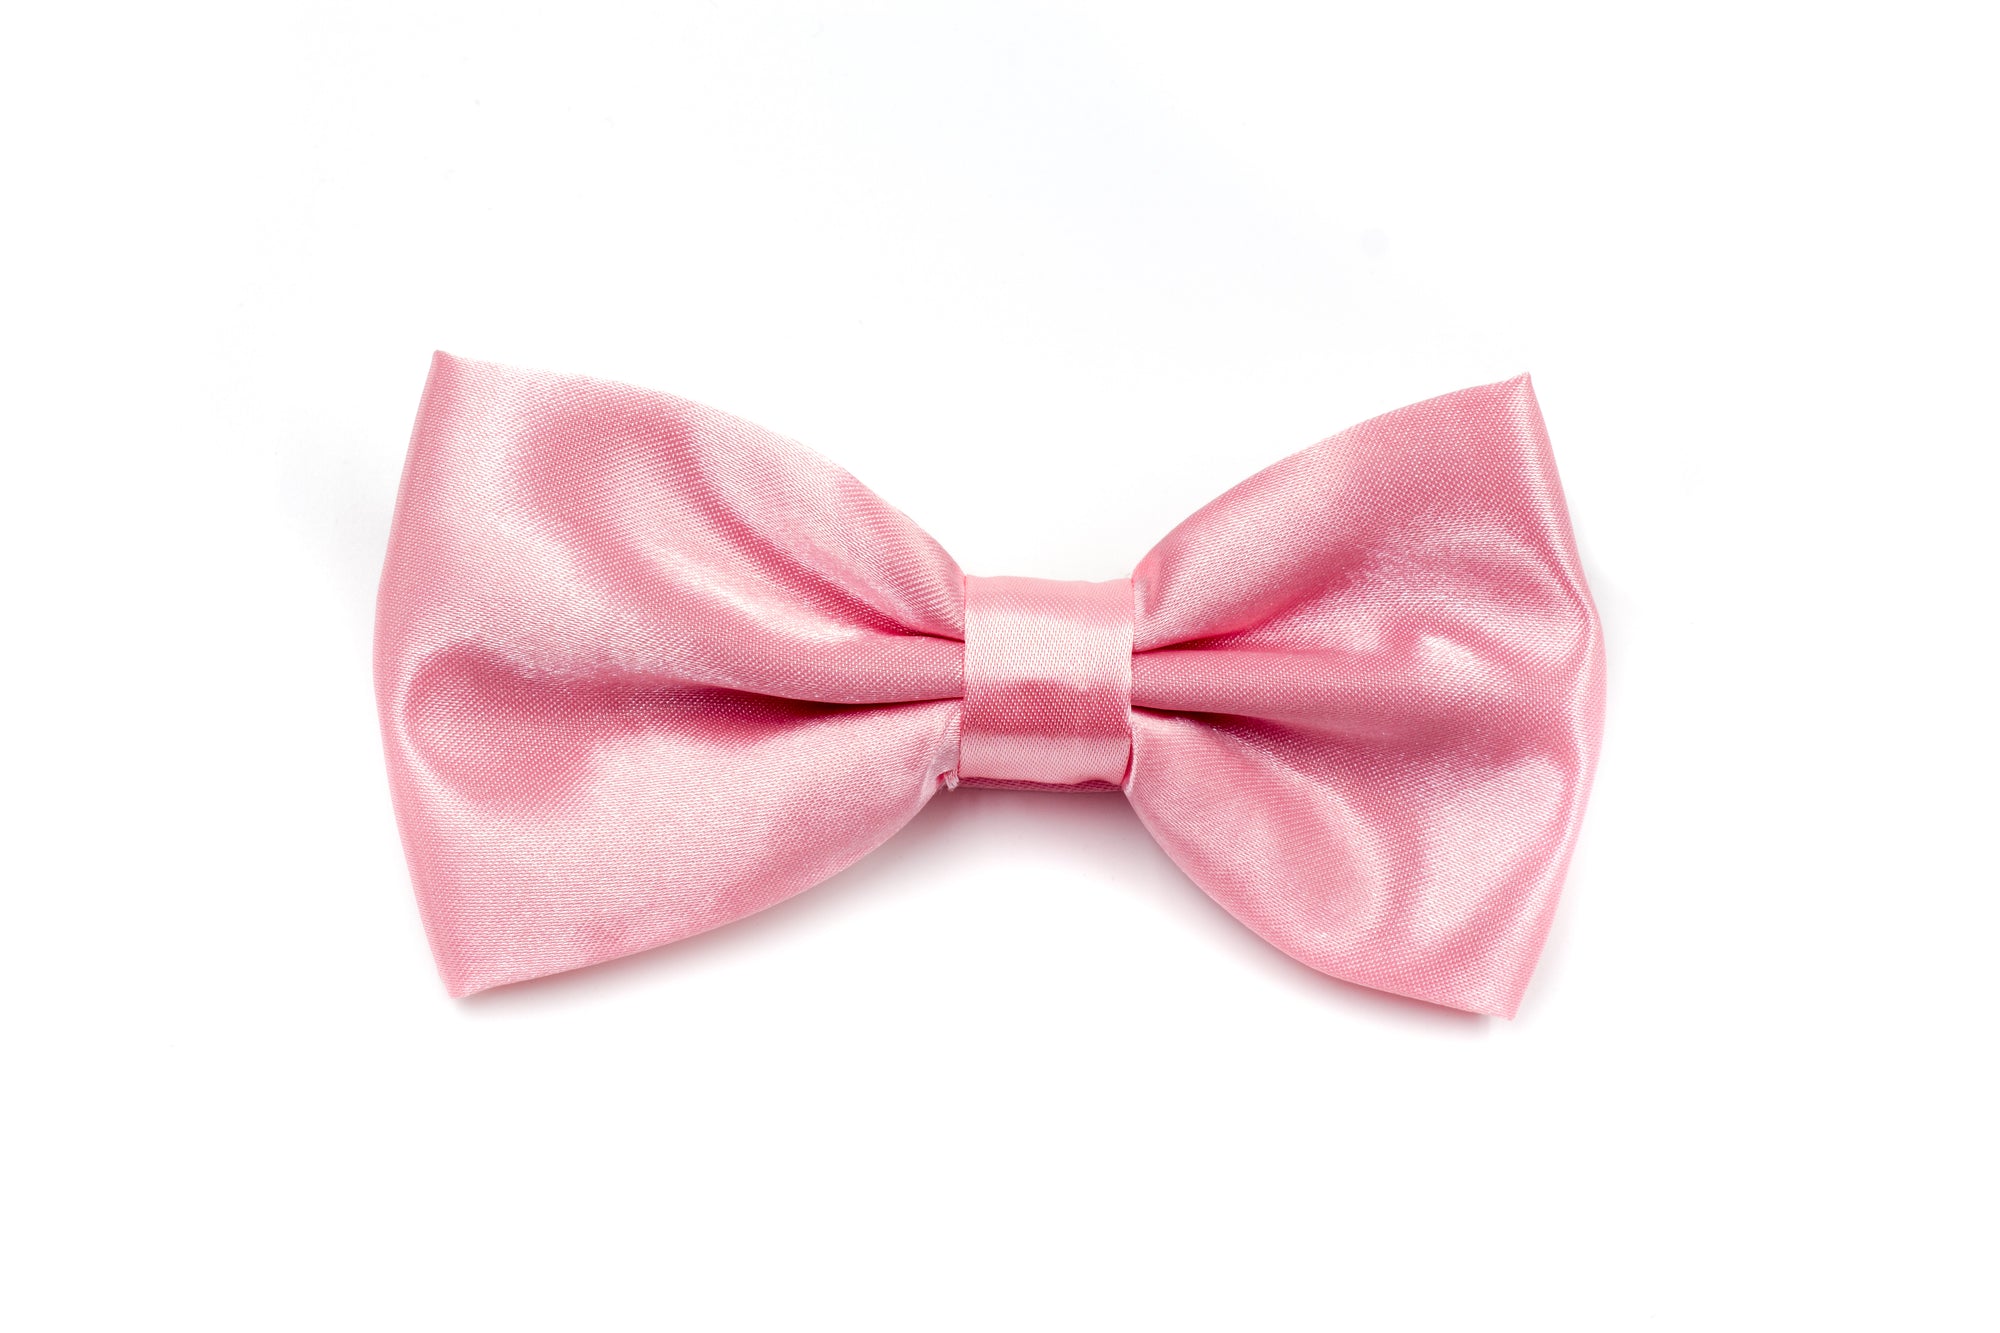 Mens Bow Tie - Dusty Pink